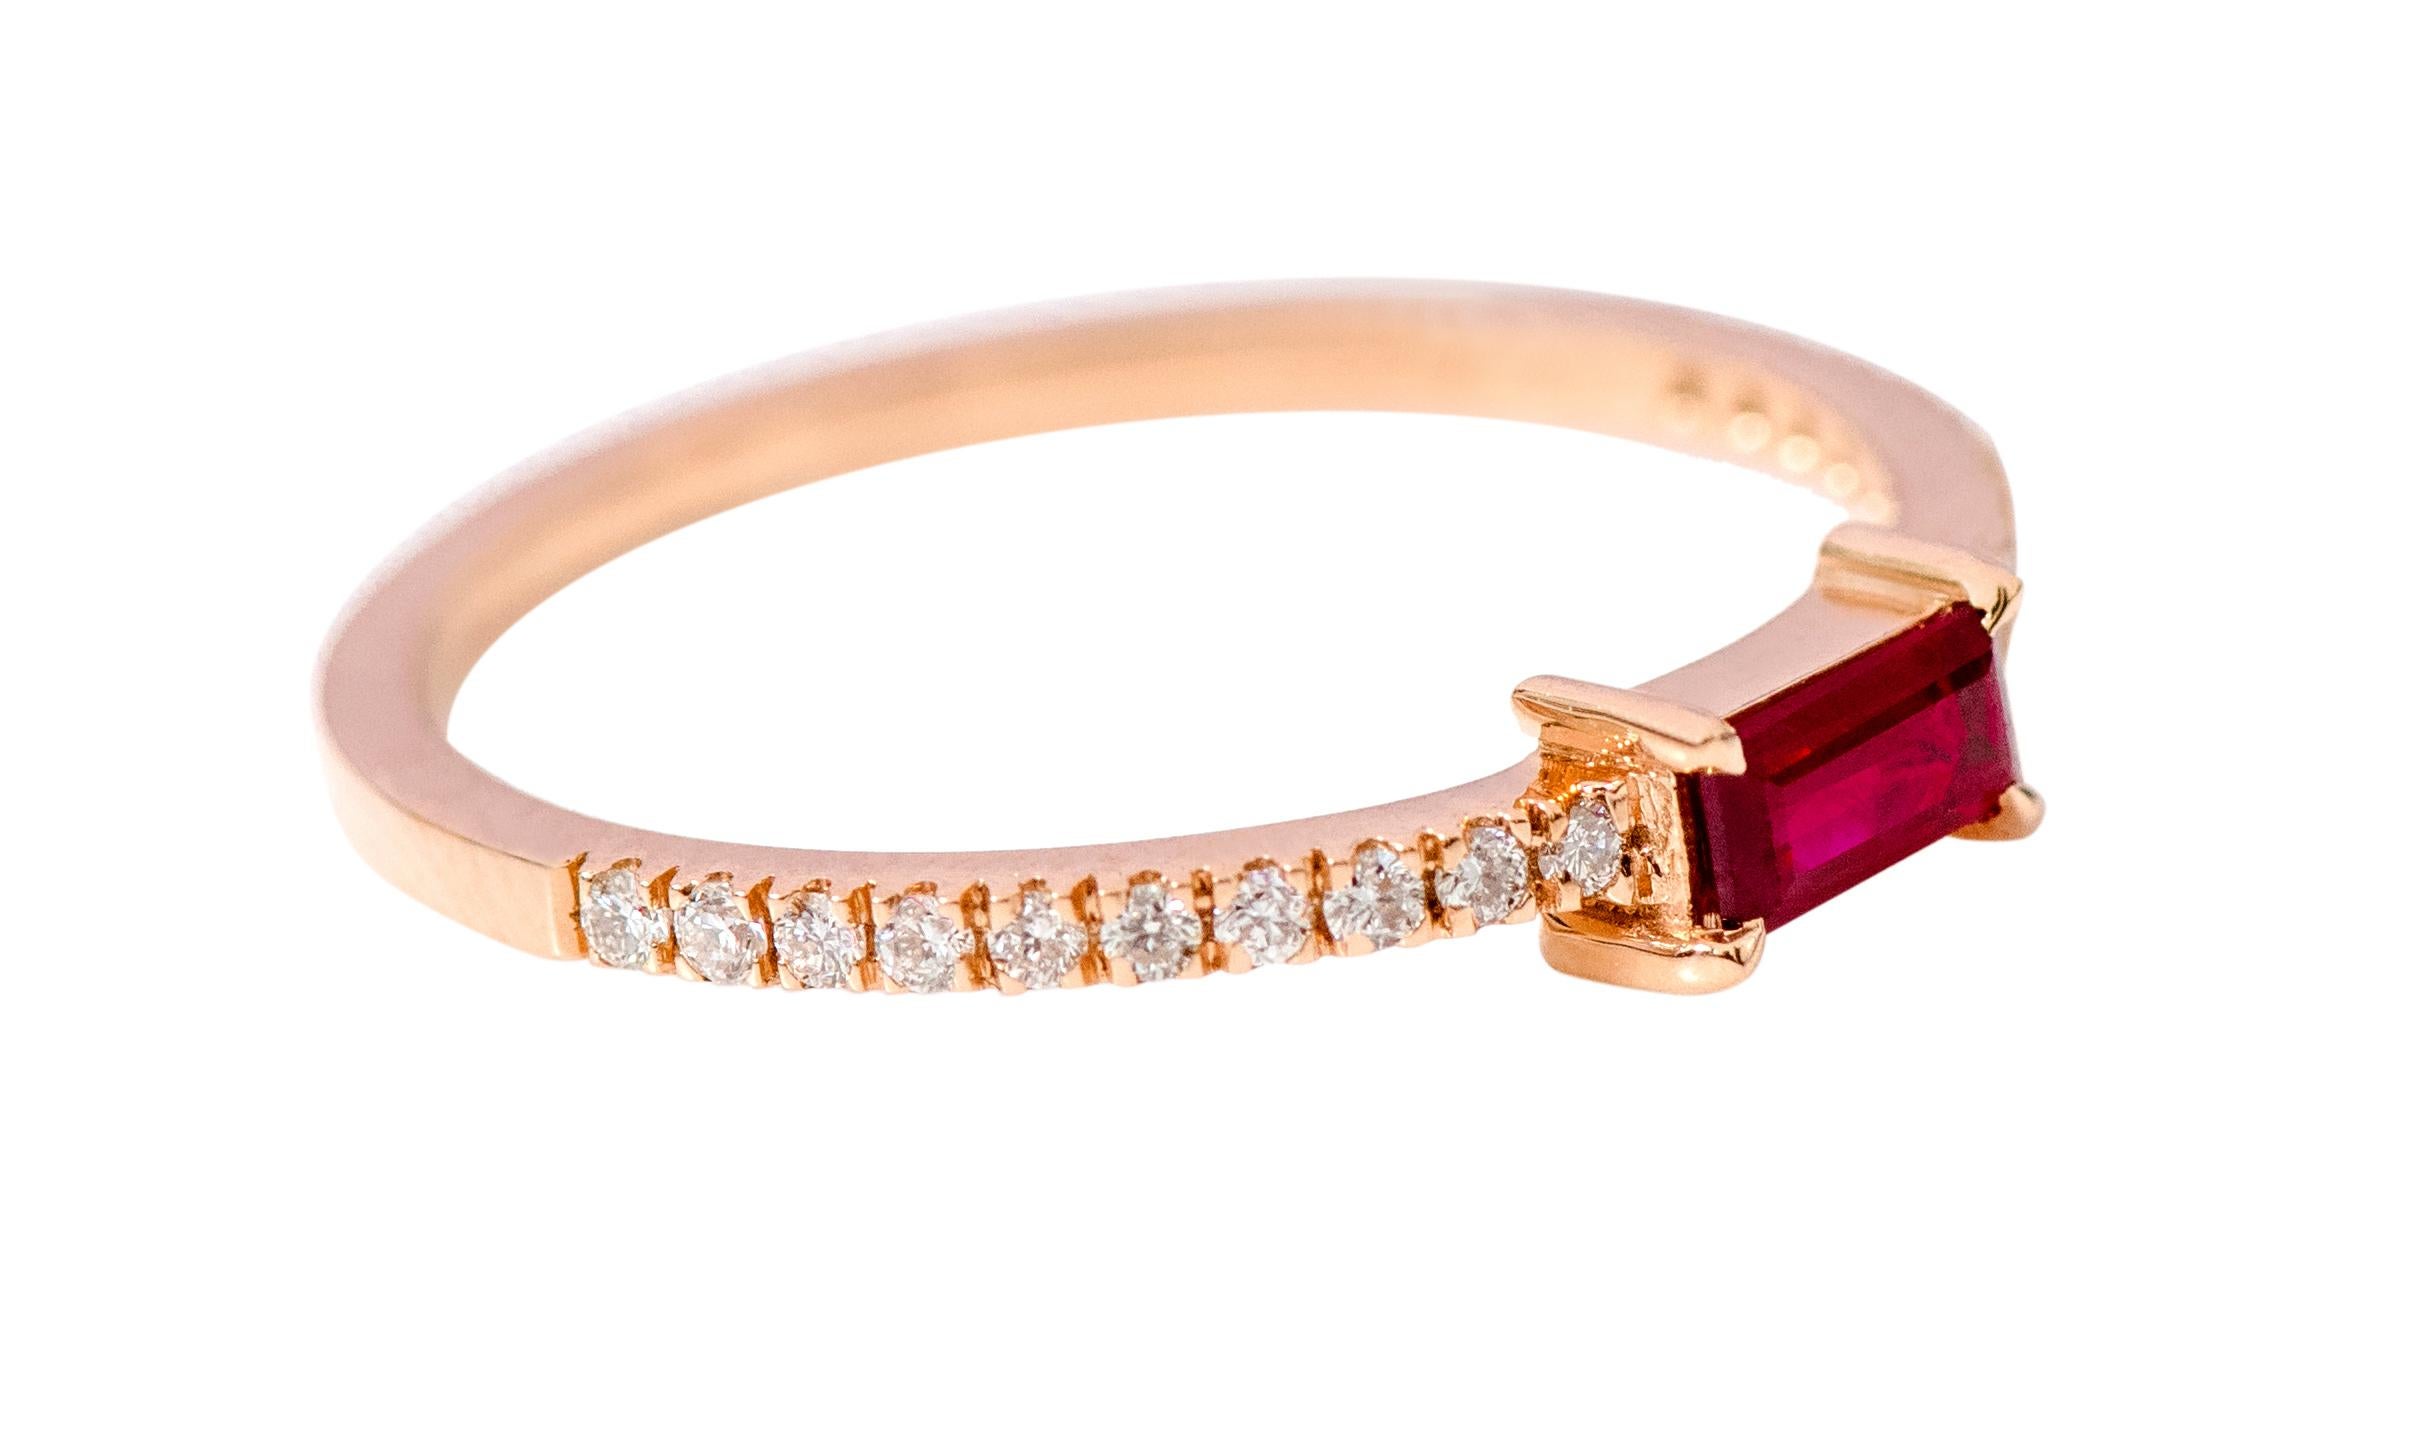 18 Karat Rose Gold Ruby and Diamond Solitaire Eternity Band Ring

This incredible pigeon blood red ruby and diamond ring is sensational. The solitaire baguette cut ruby in eagle prong box setting in rose gold is perfect. The thin band of half